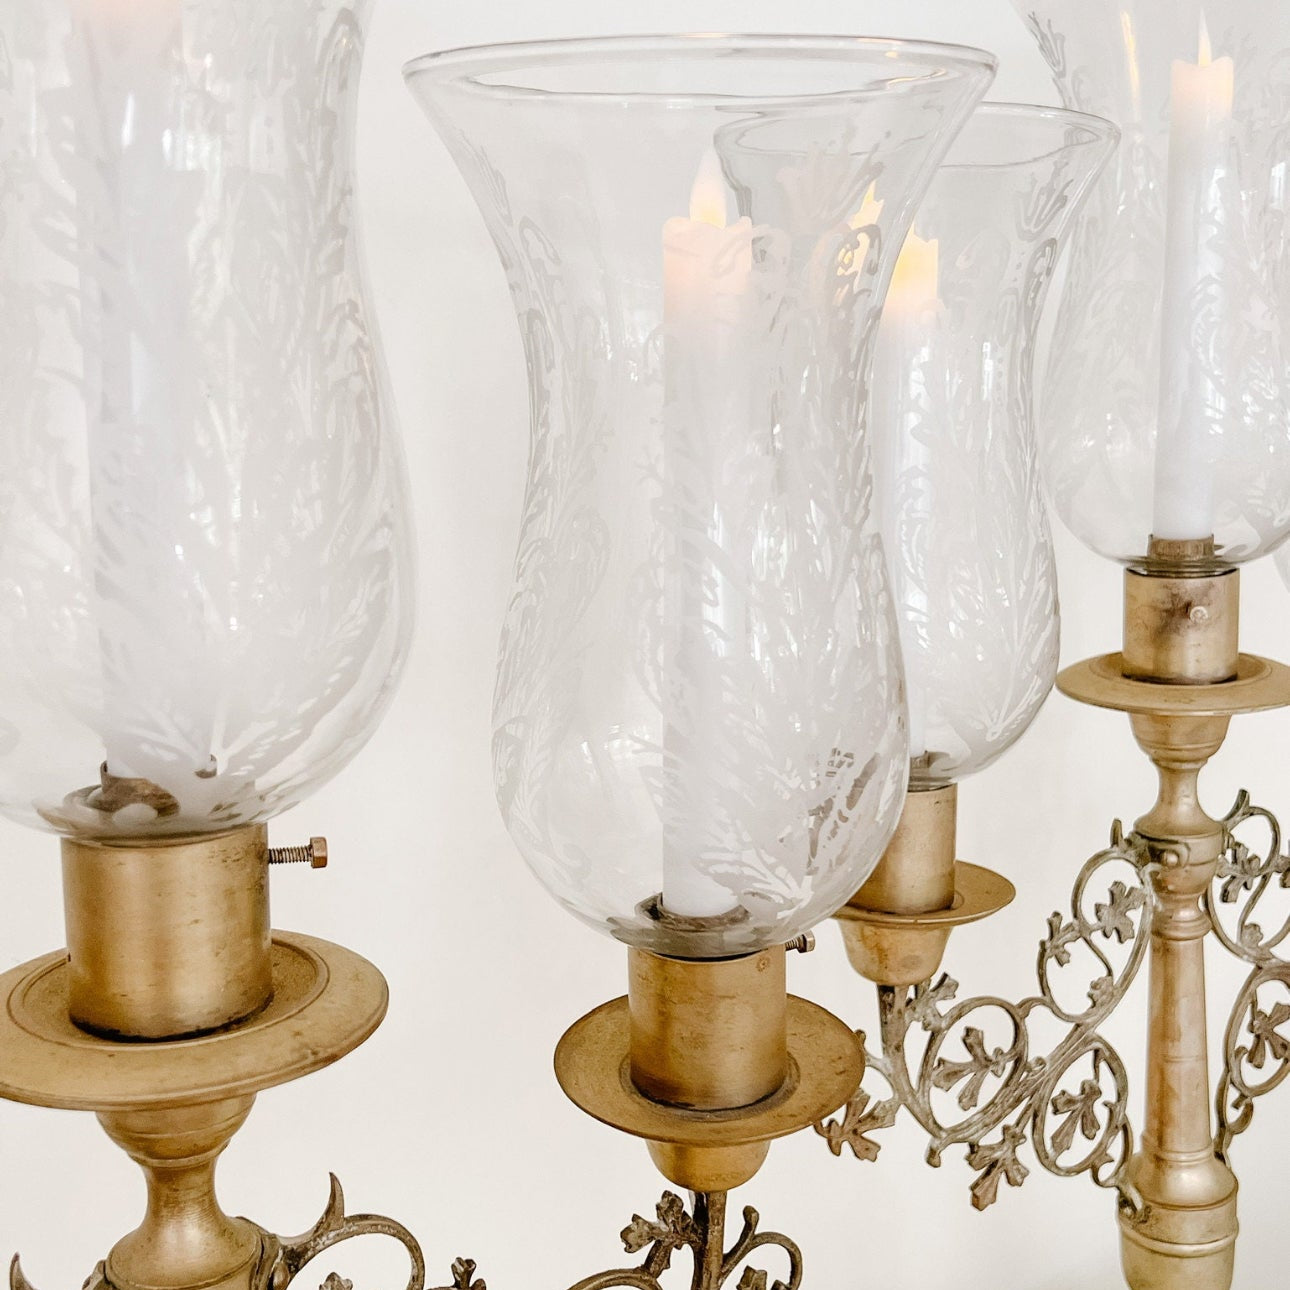 Pair of Vintage French Etched Glass Hurricane Candelabras - Ivory Lane Home